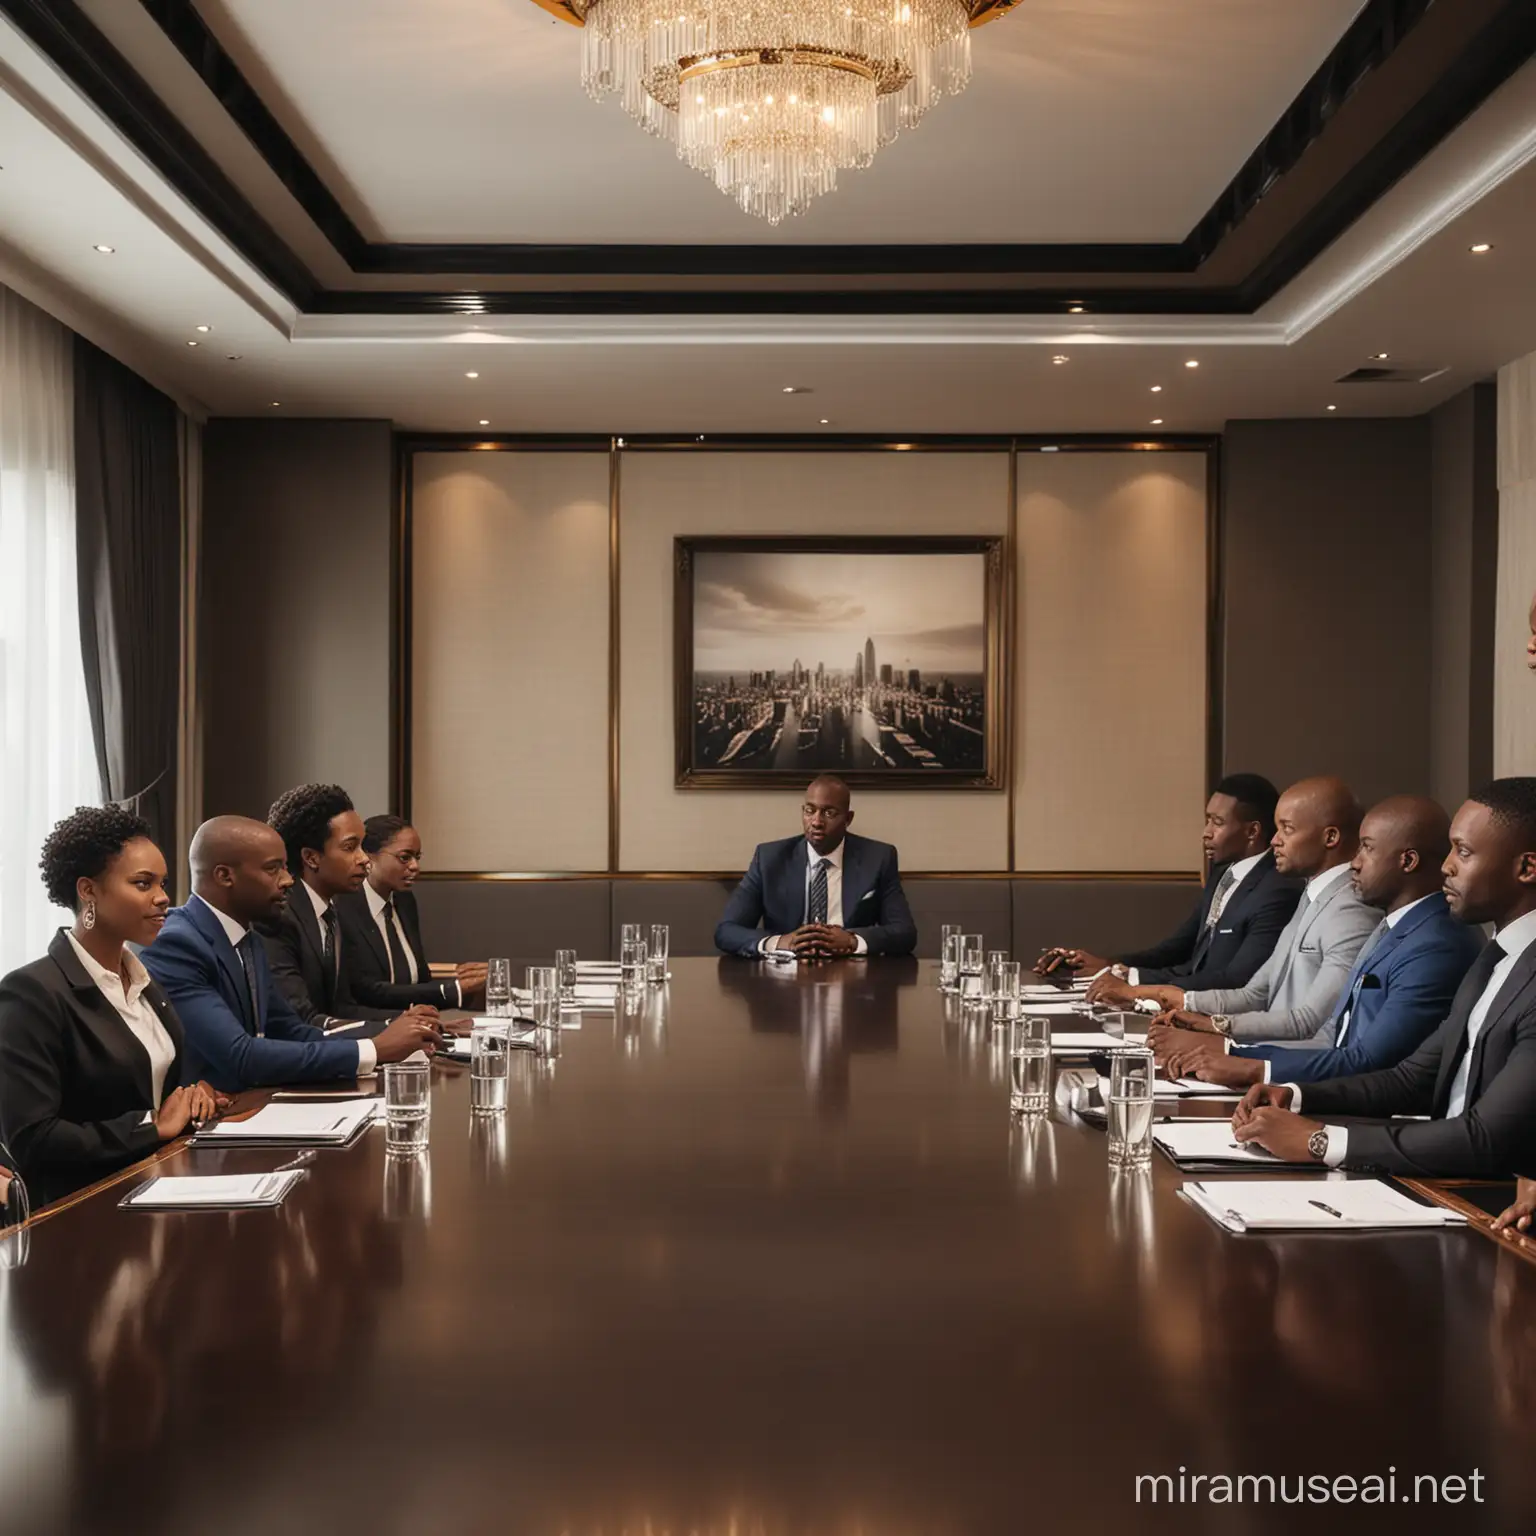 Luxury Boardroom Meeting with Professional Black Men and Women in Africa